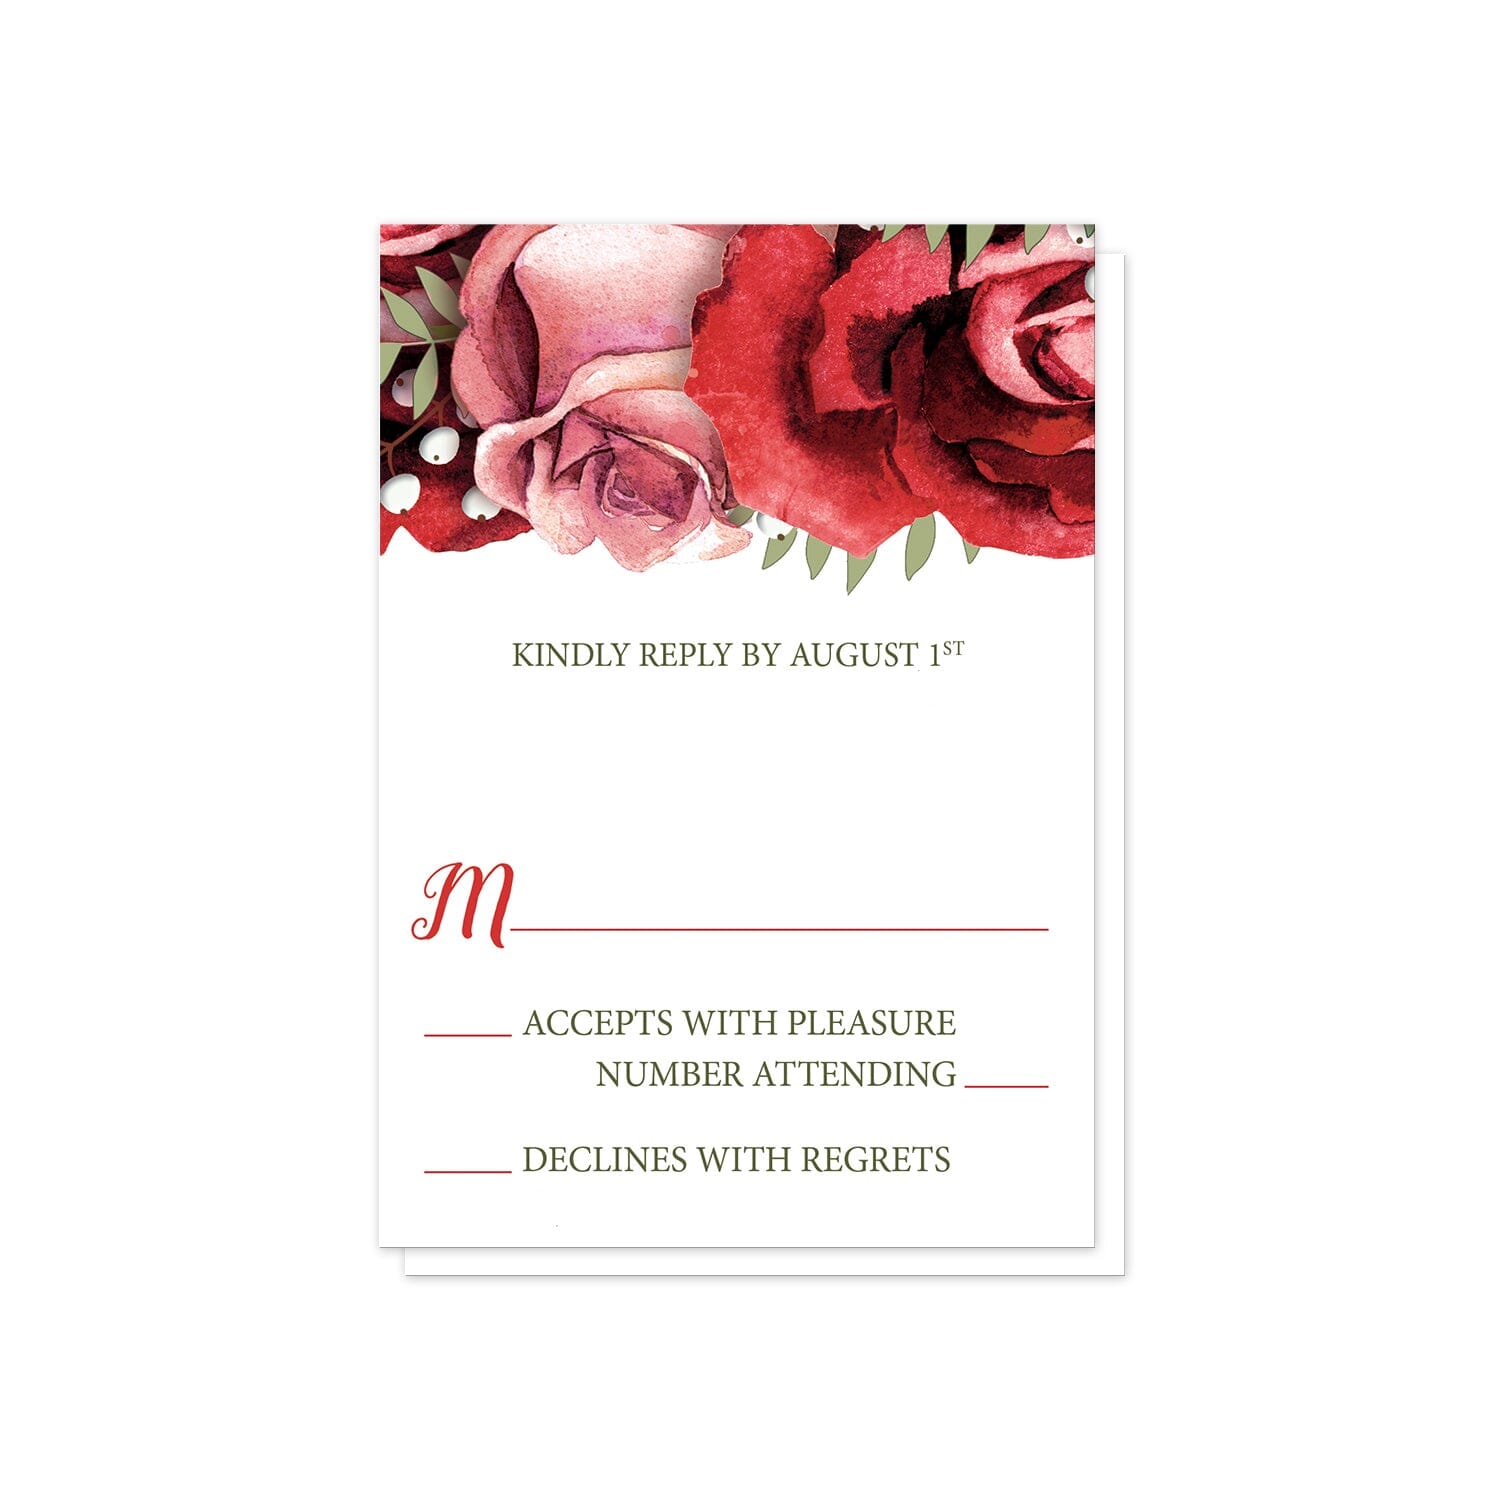 Rustic Red Pink Rose Green White RSVP Cards at Artistically Invited.